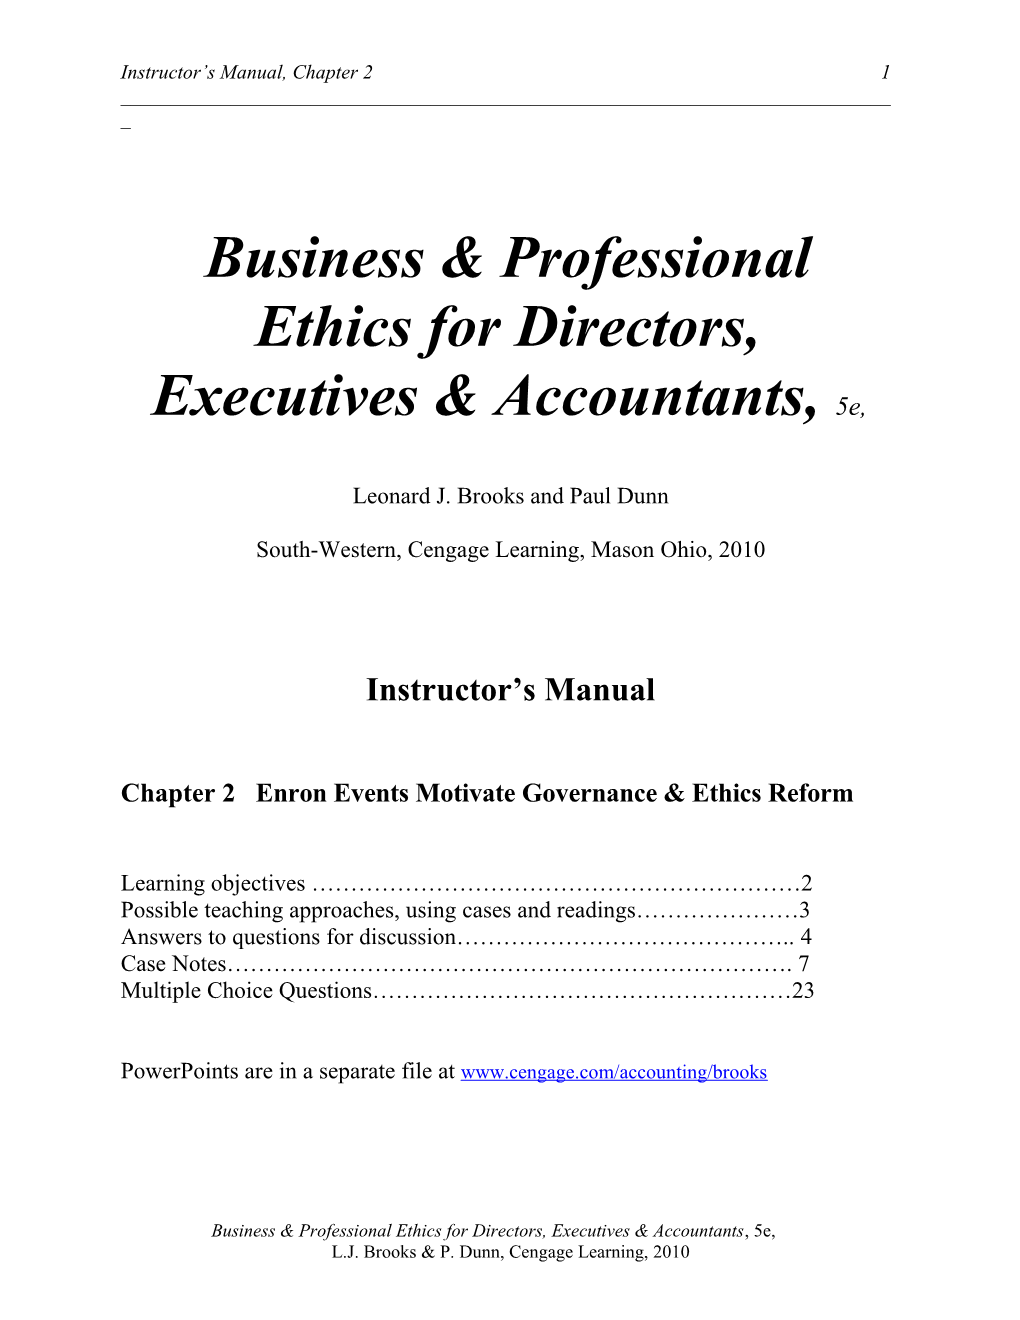 Commentary on Chapter 1: Ethics Expectations